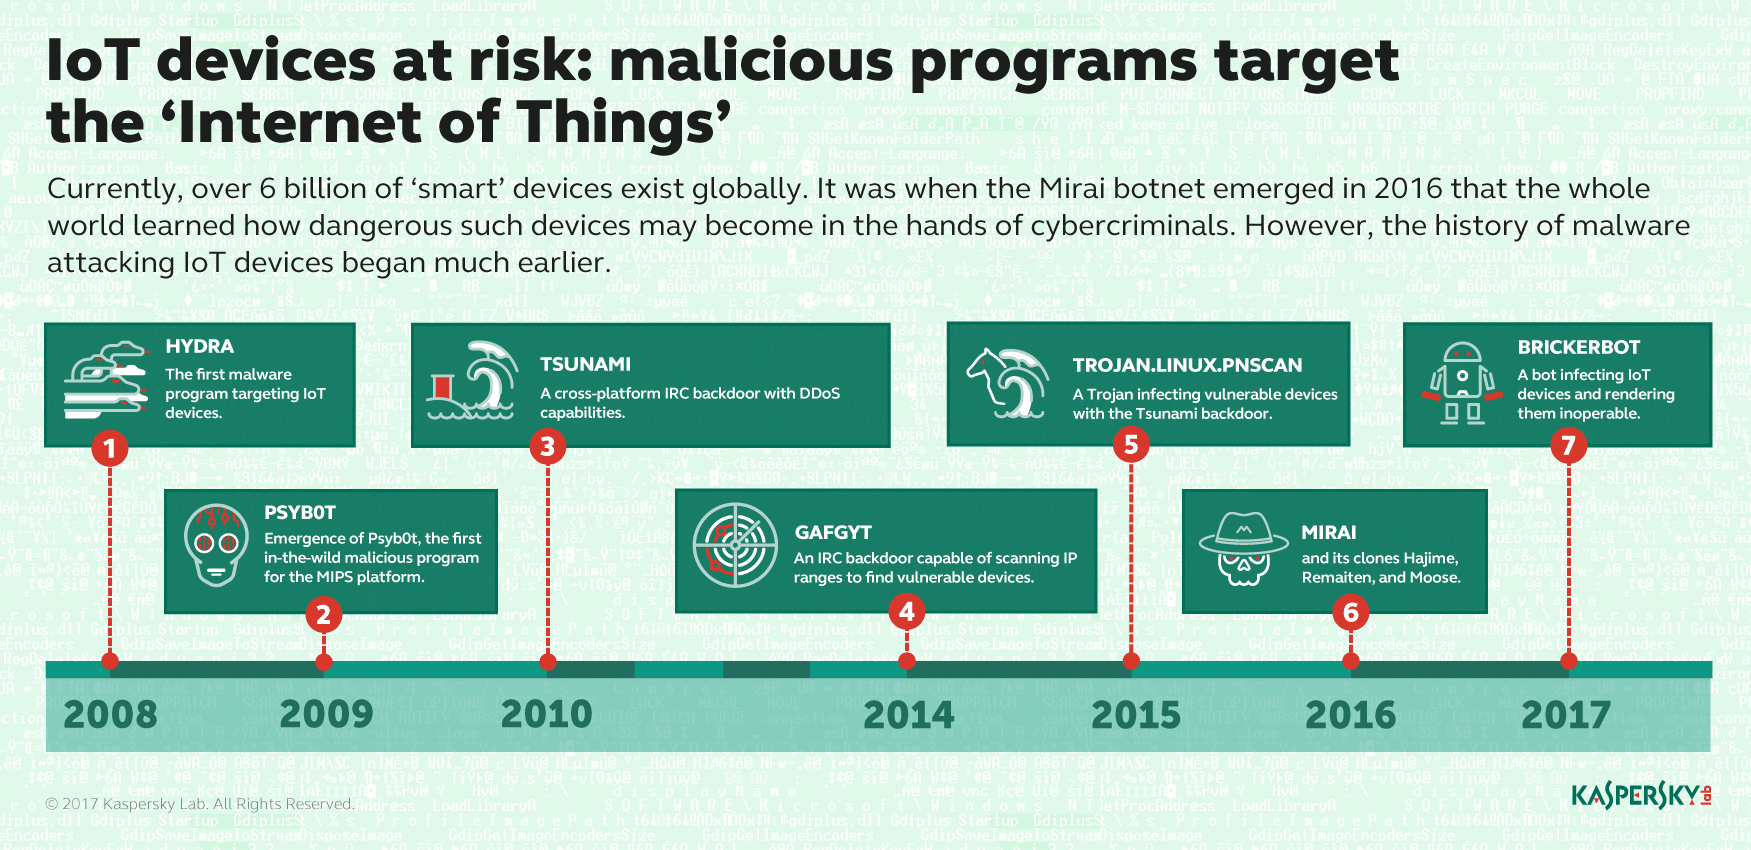 IoT devices at risk 